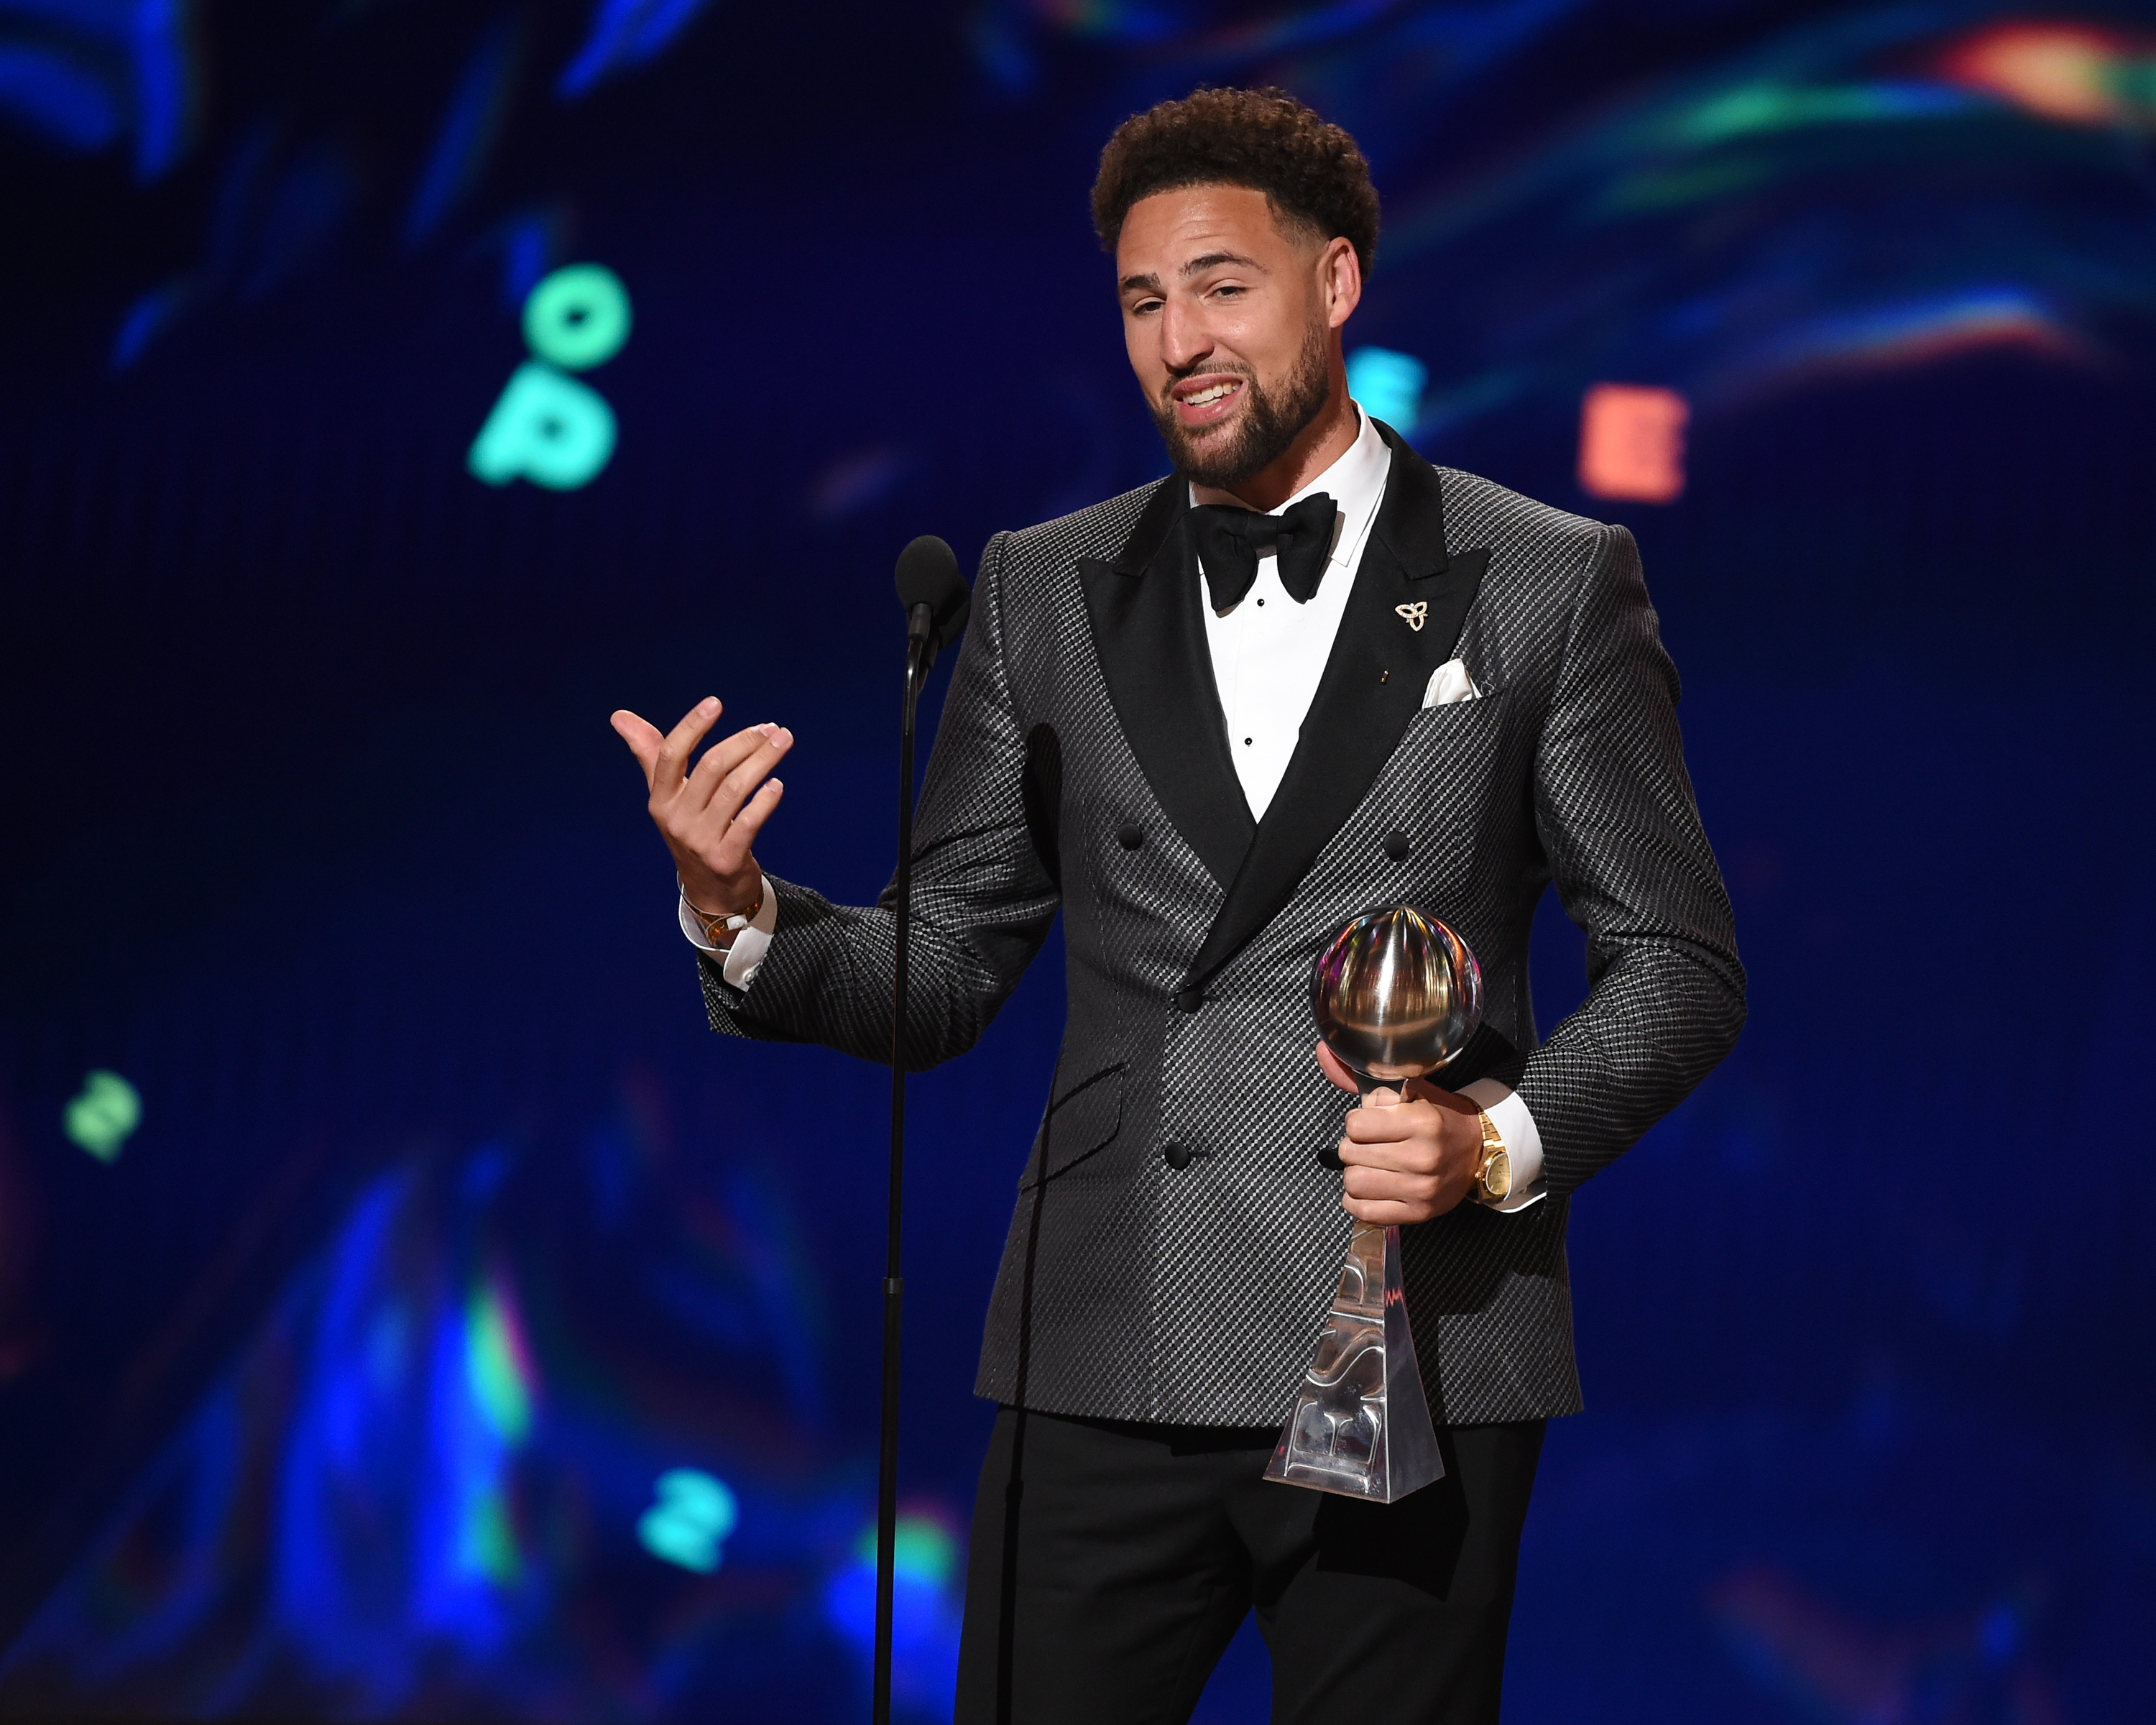 ABC’s Coverage of The 2022 ESPYS Presented by Capital One